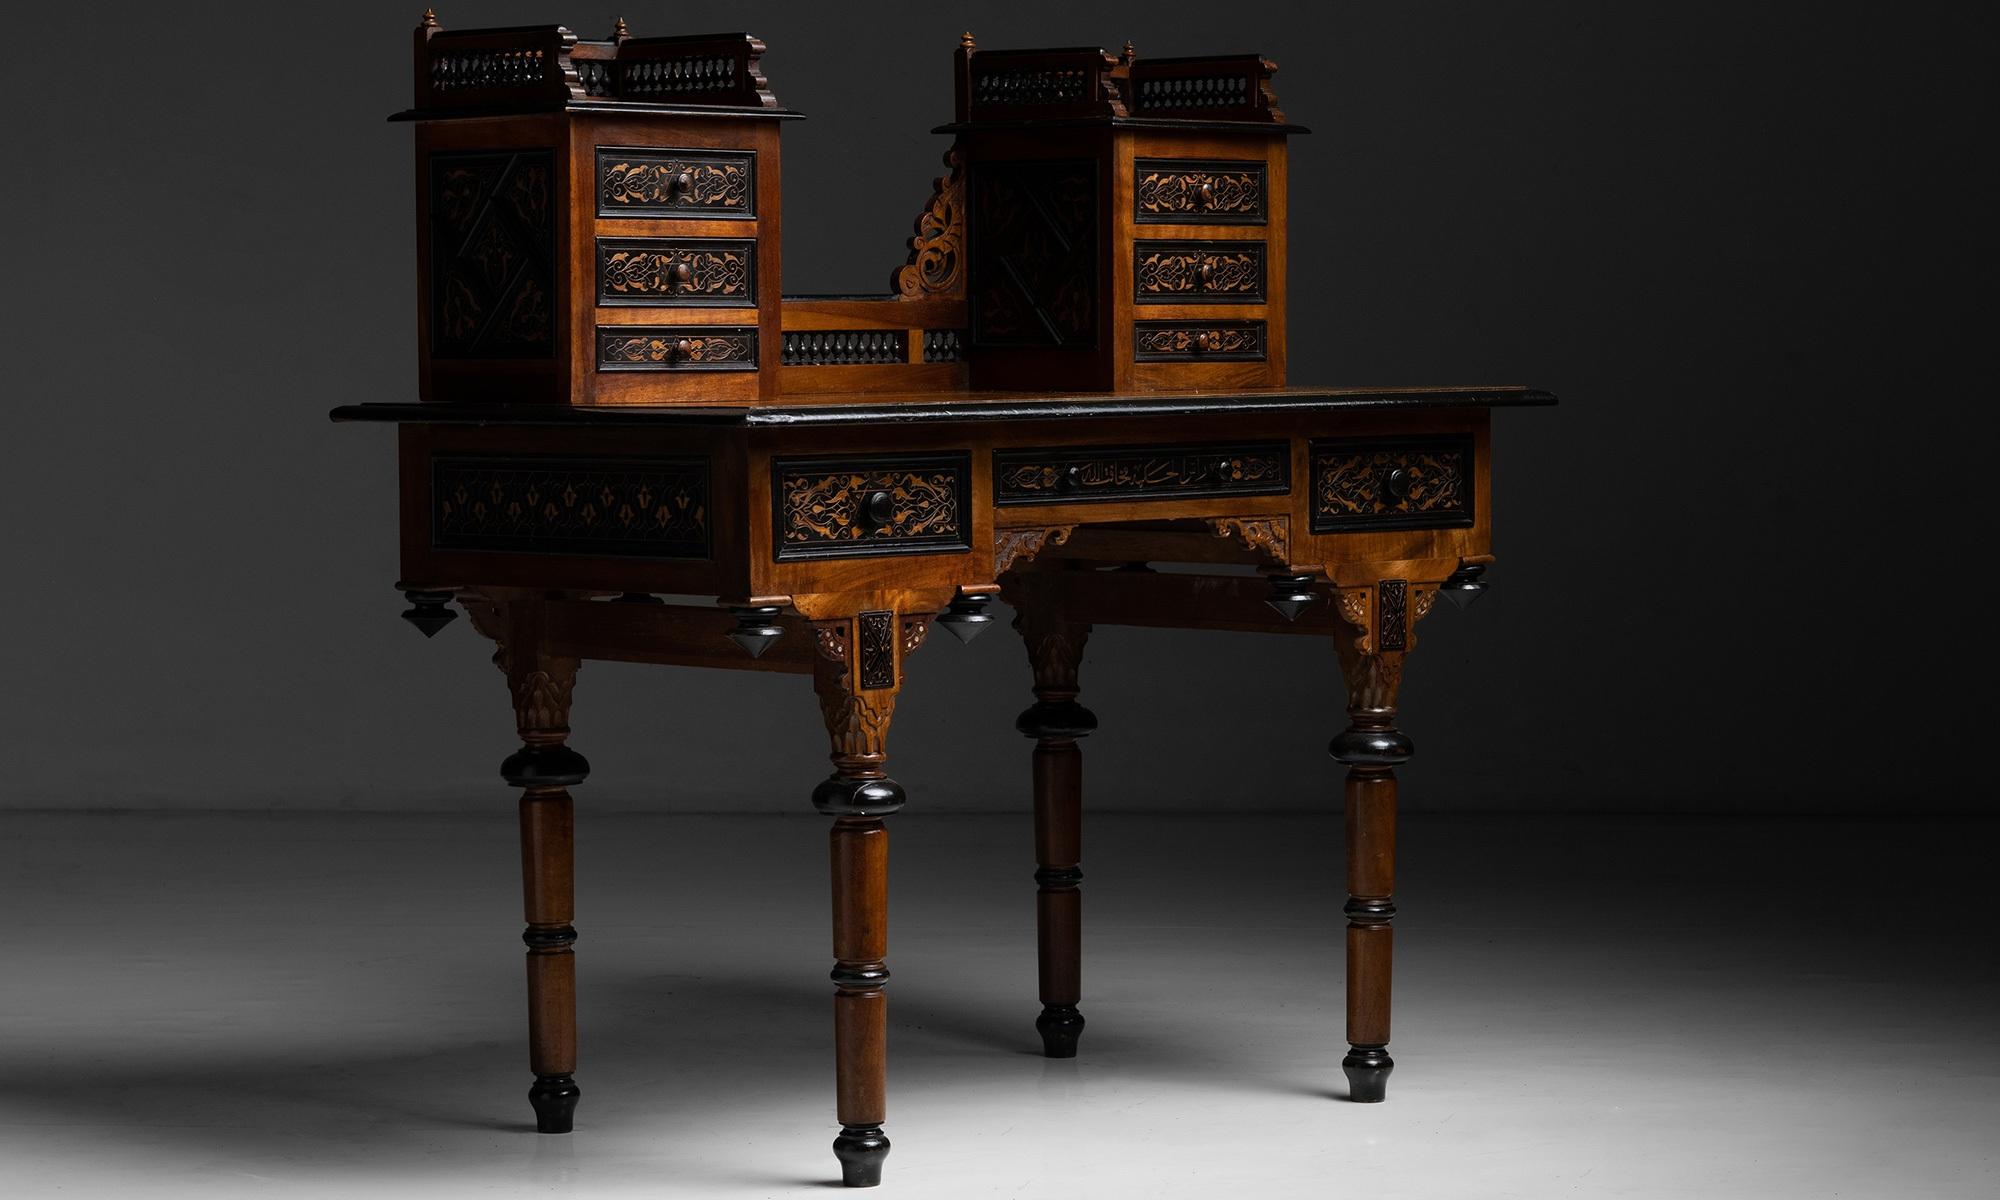 Ottoman empire desk.

Turkey, circa 1895.

Ottoman era desk with inlaid and carved details to all sides.

Measures: 47”L x 27.5”D x 47”H.